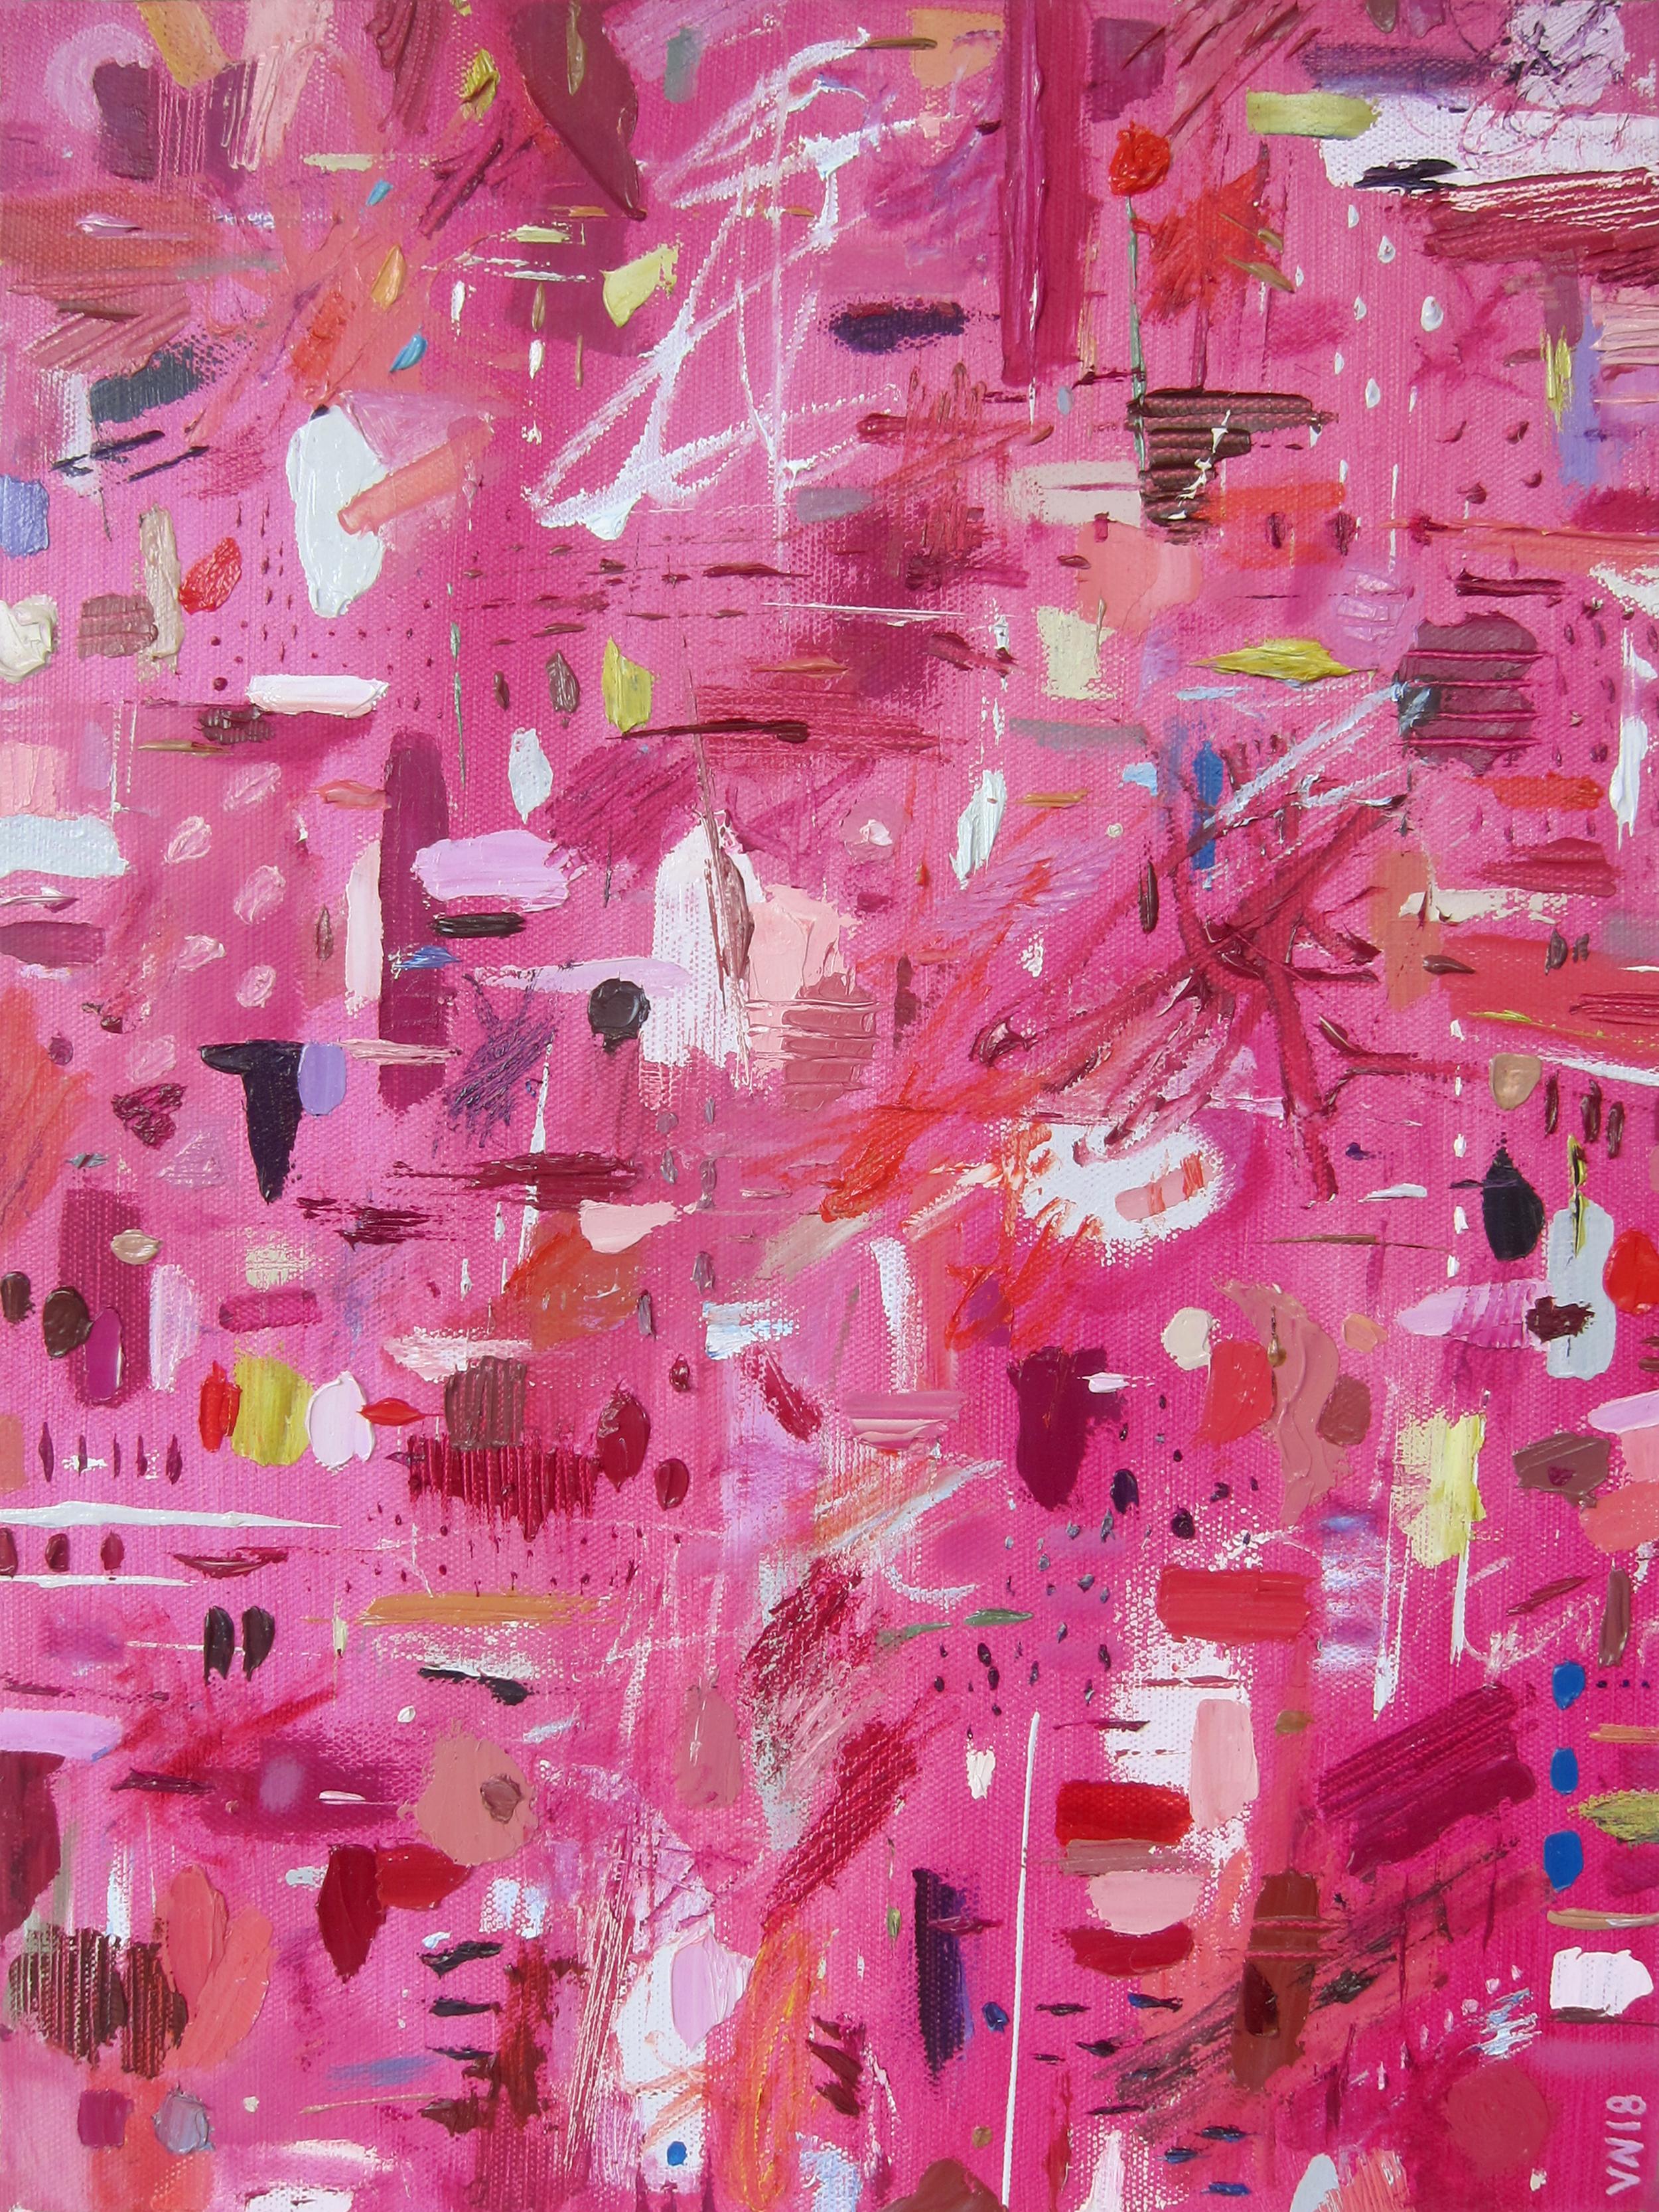 Abstract Painting Valerie Ng - Sur le rose